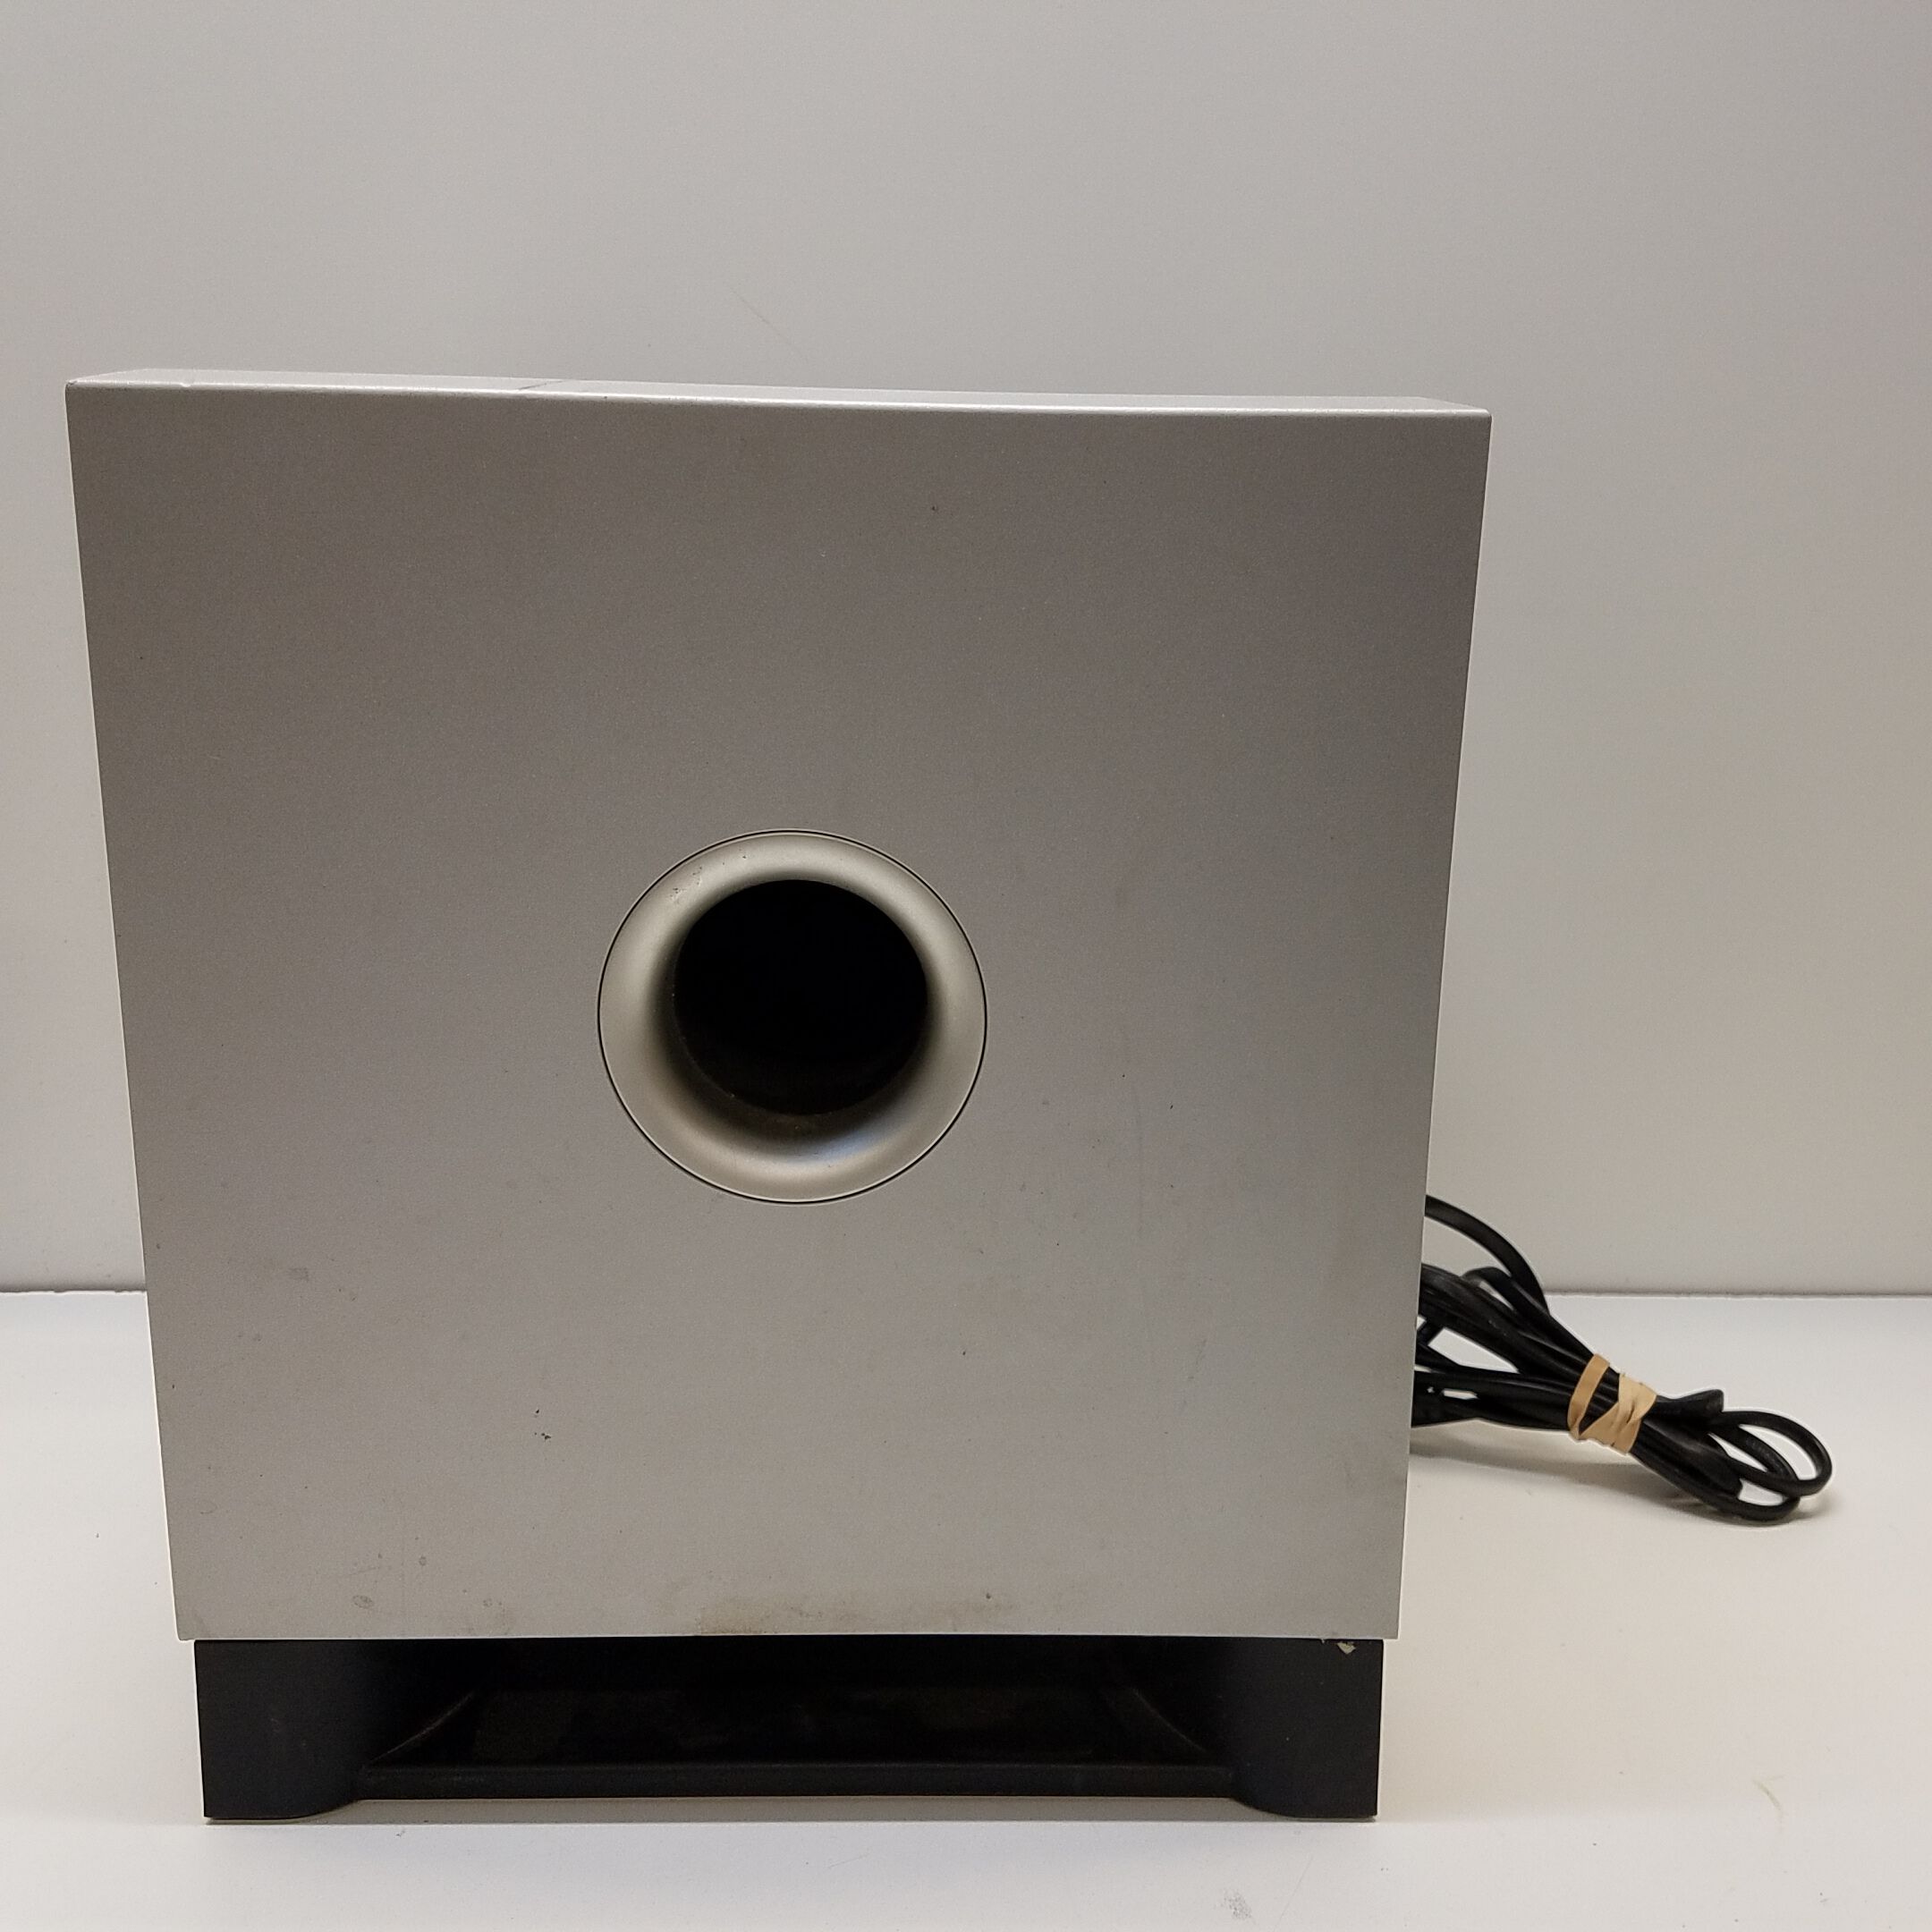 Buy the Yamaha Powered Active Subwoofer Silver Cube 45w Sub Model